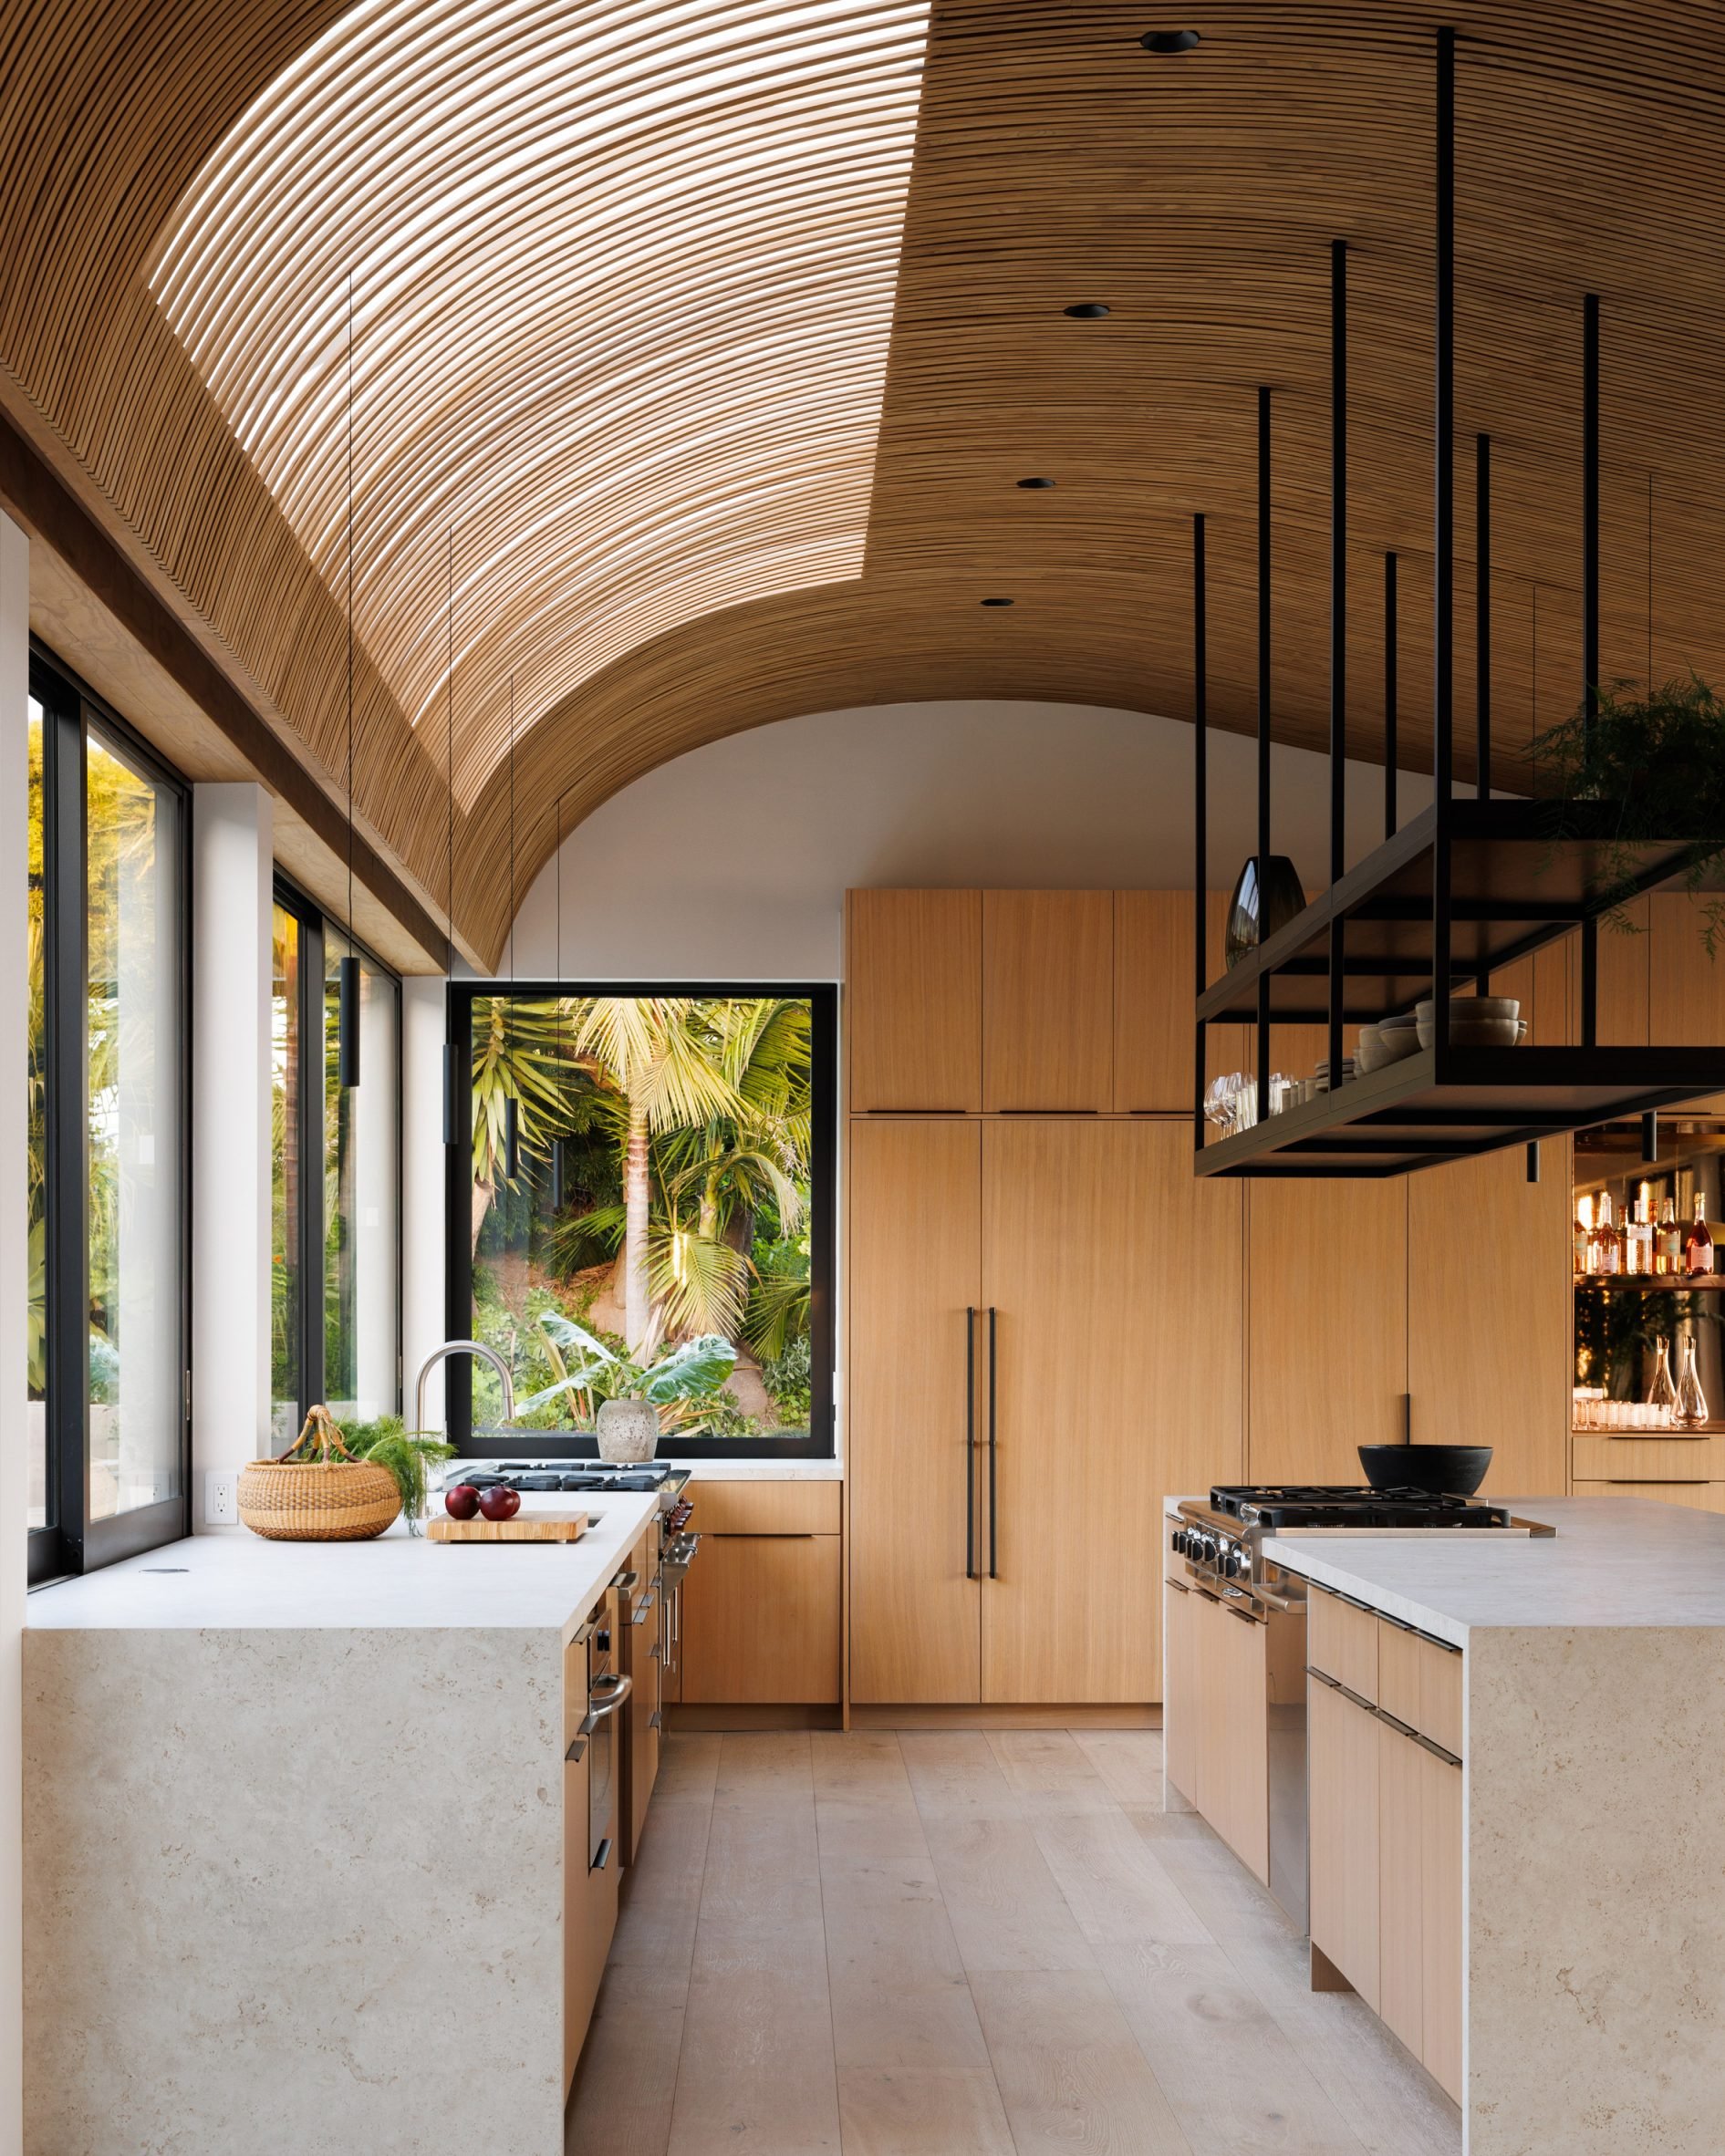 Kitchen with neutral decor and a wave-like wooden ceiling